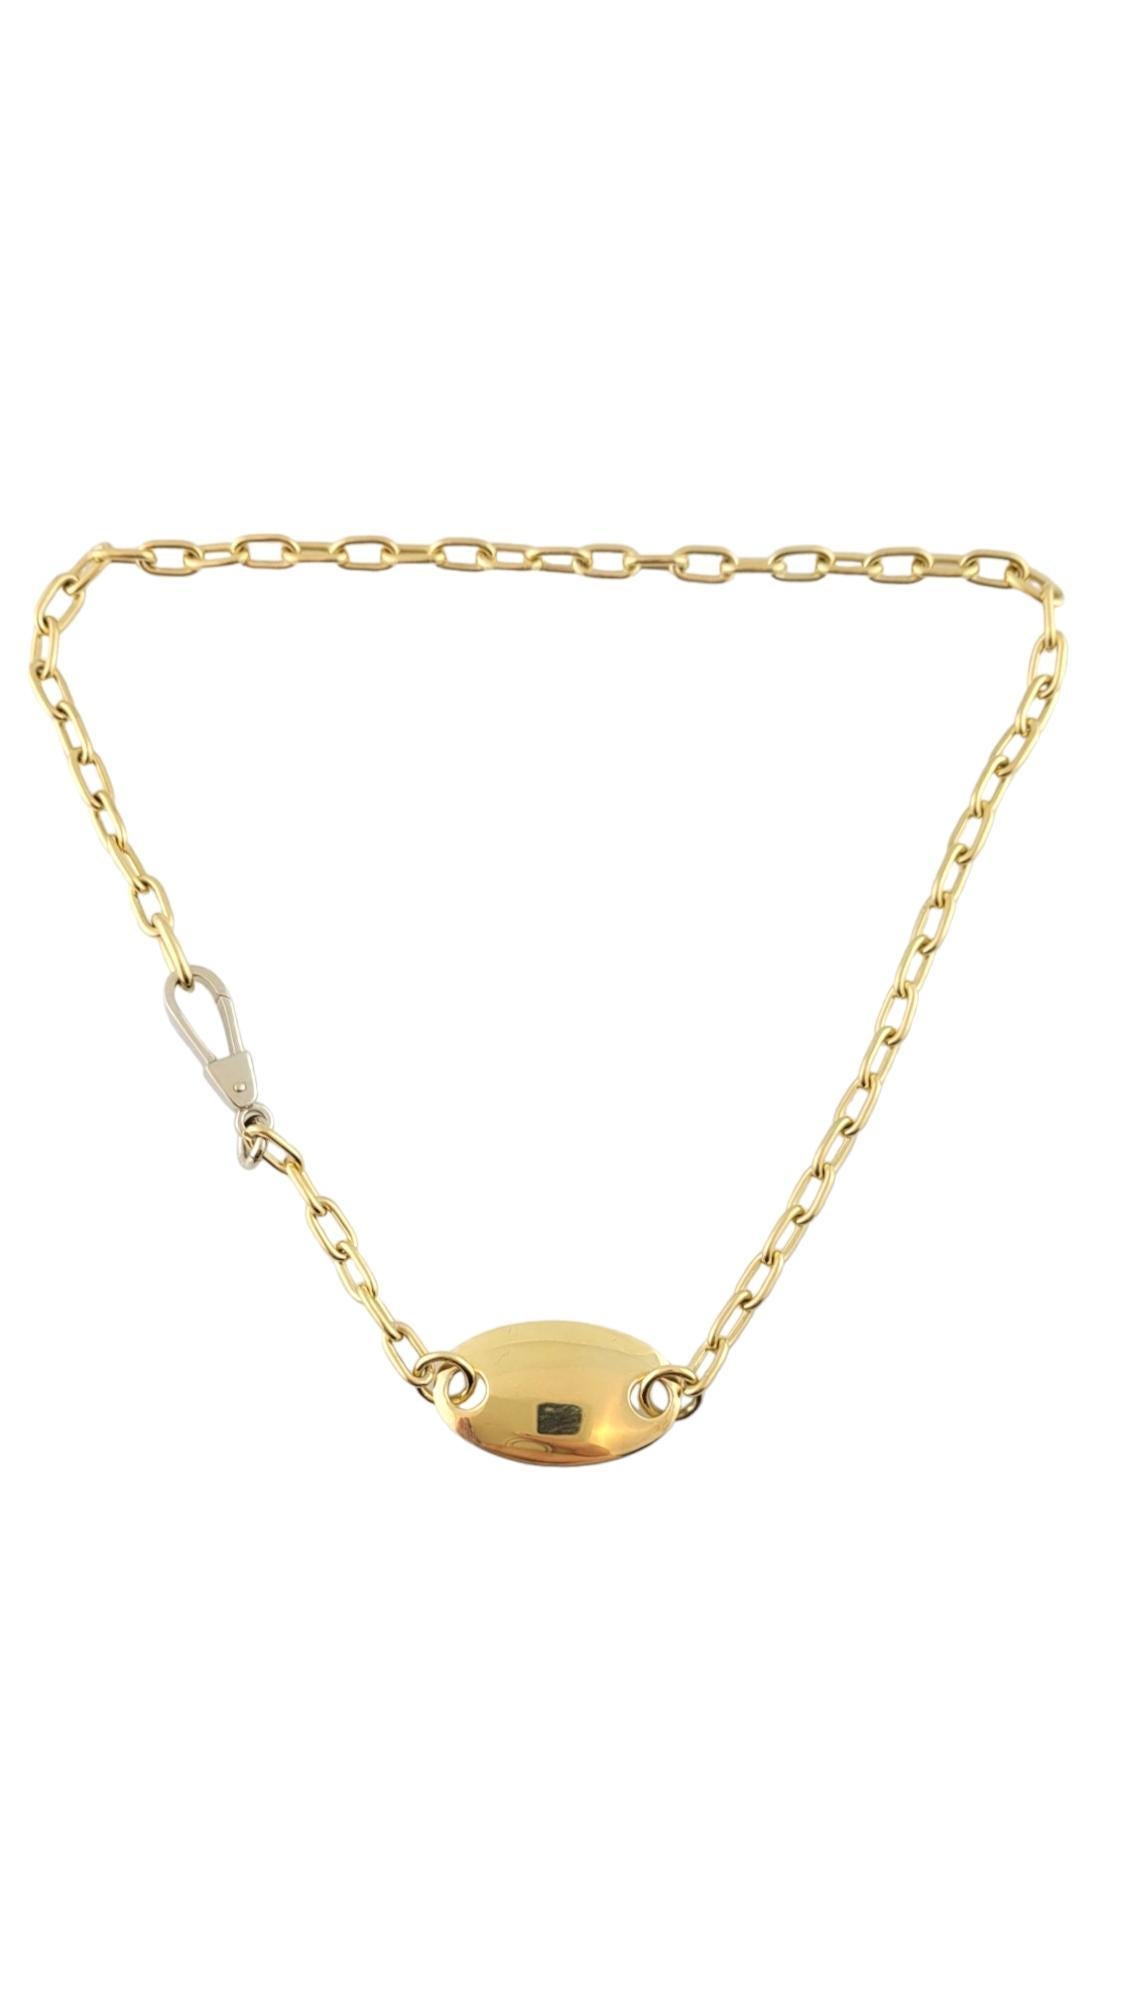 18K Yellow Gold Pomellato ID Chain Link Necklace #16123